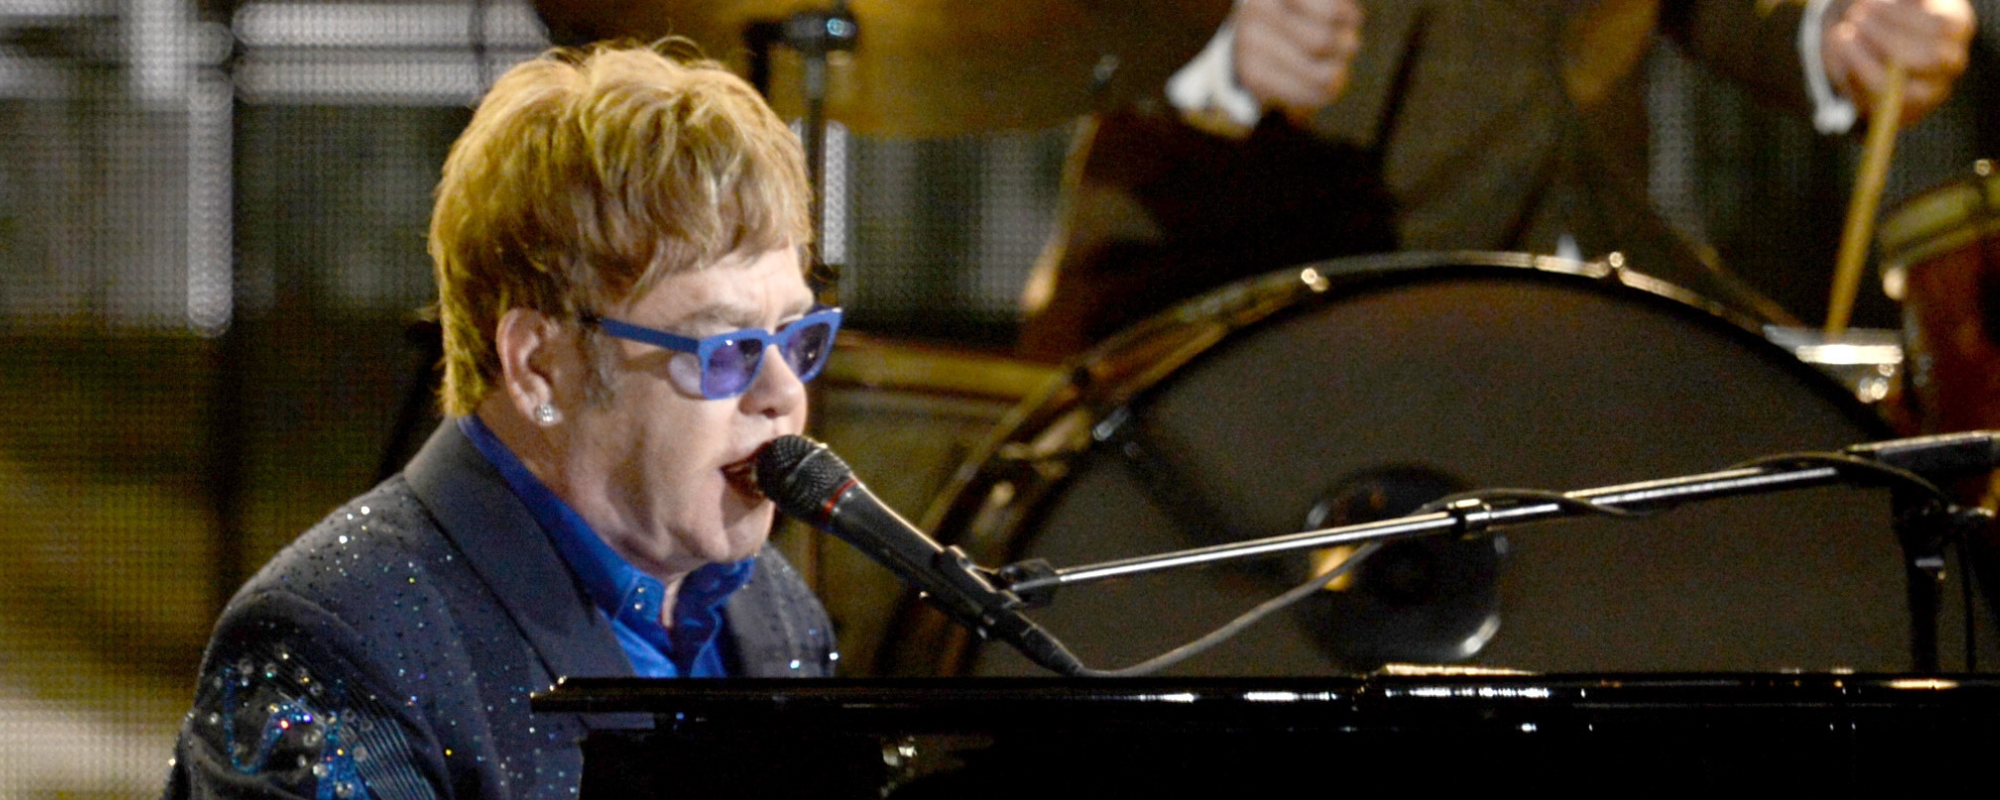 5 Moments Where Elton John Wowed Us on the Piano